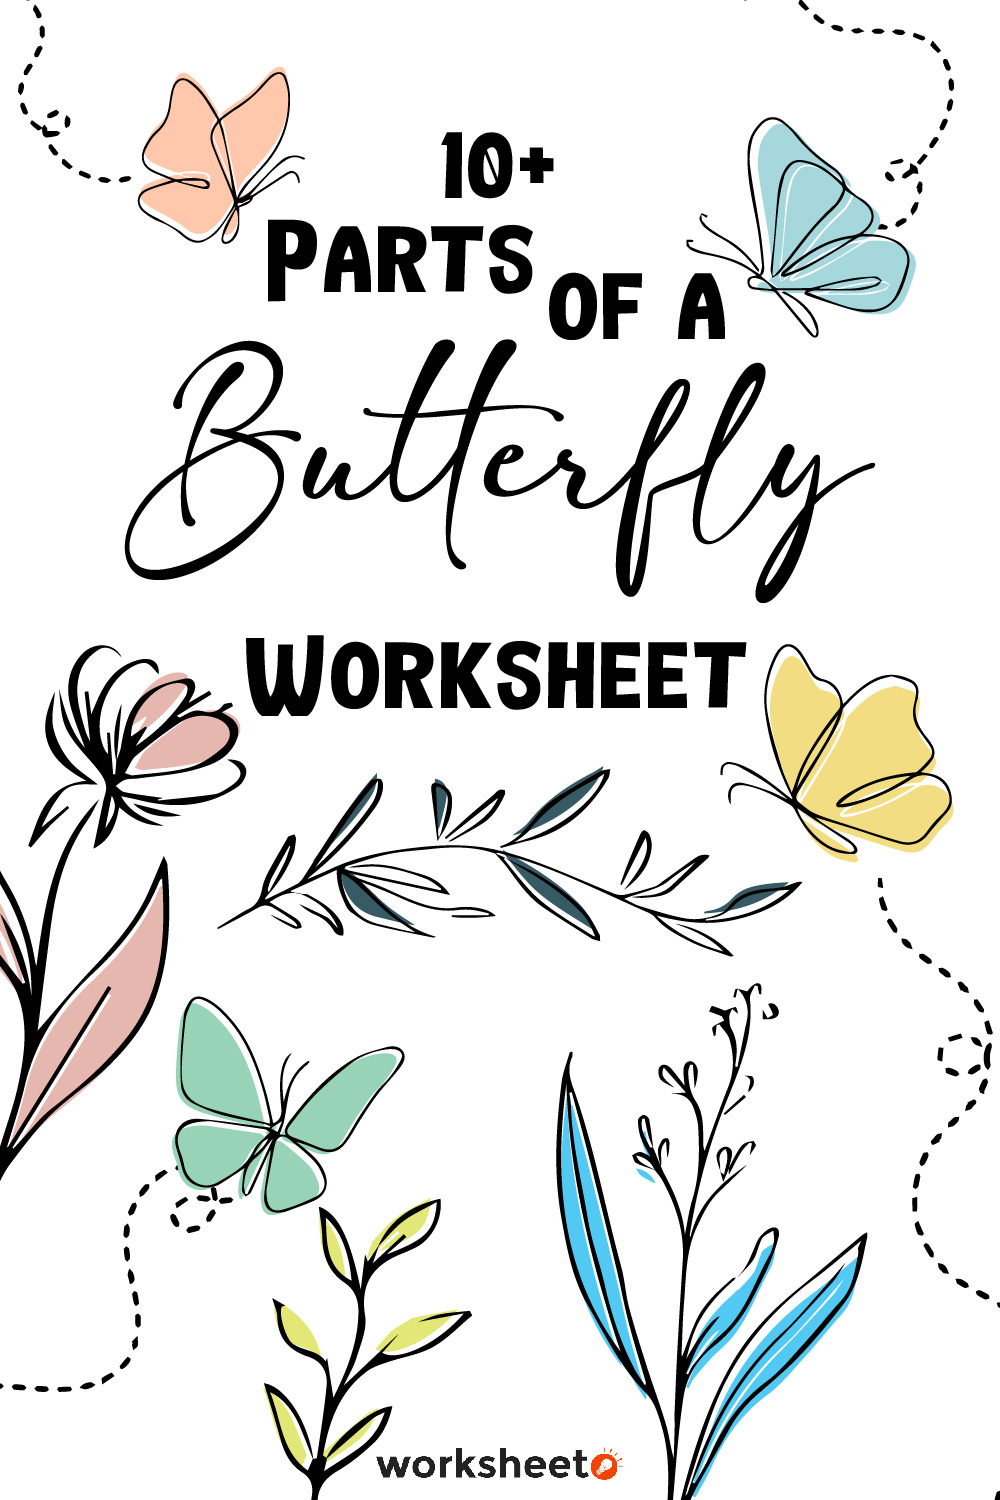 Parts of a Butterfly Worksheet